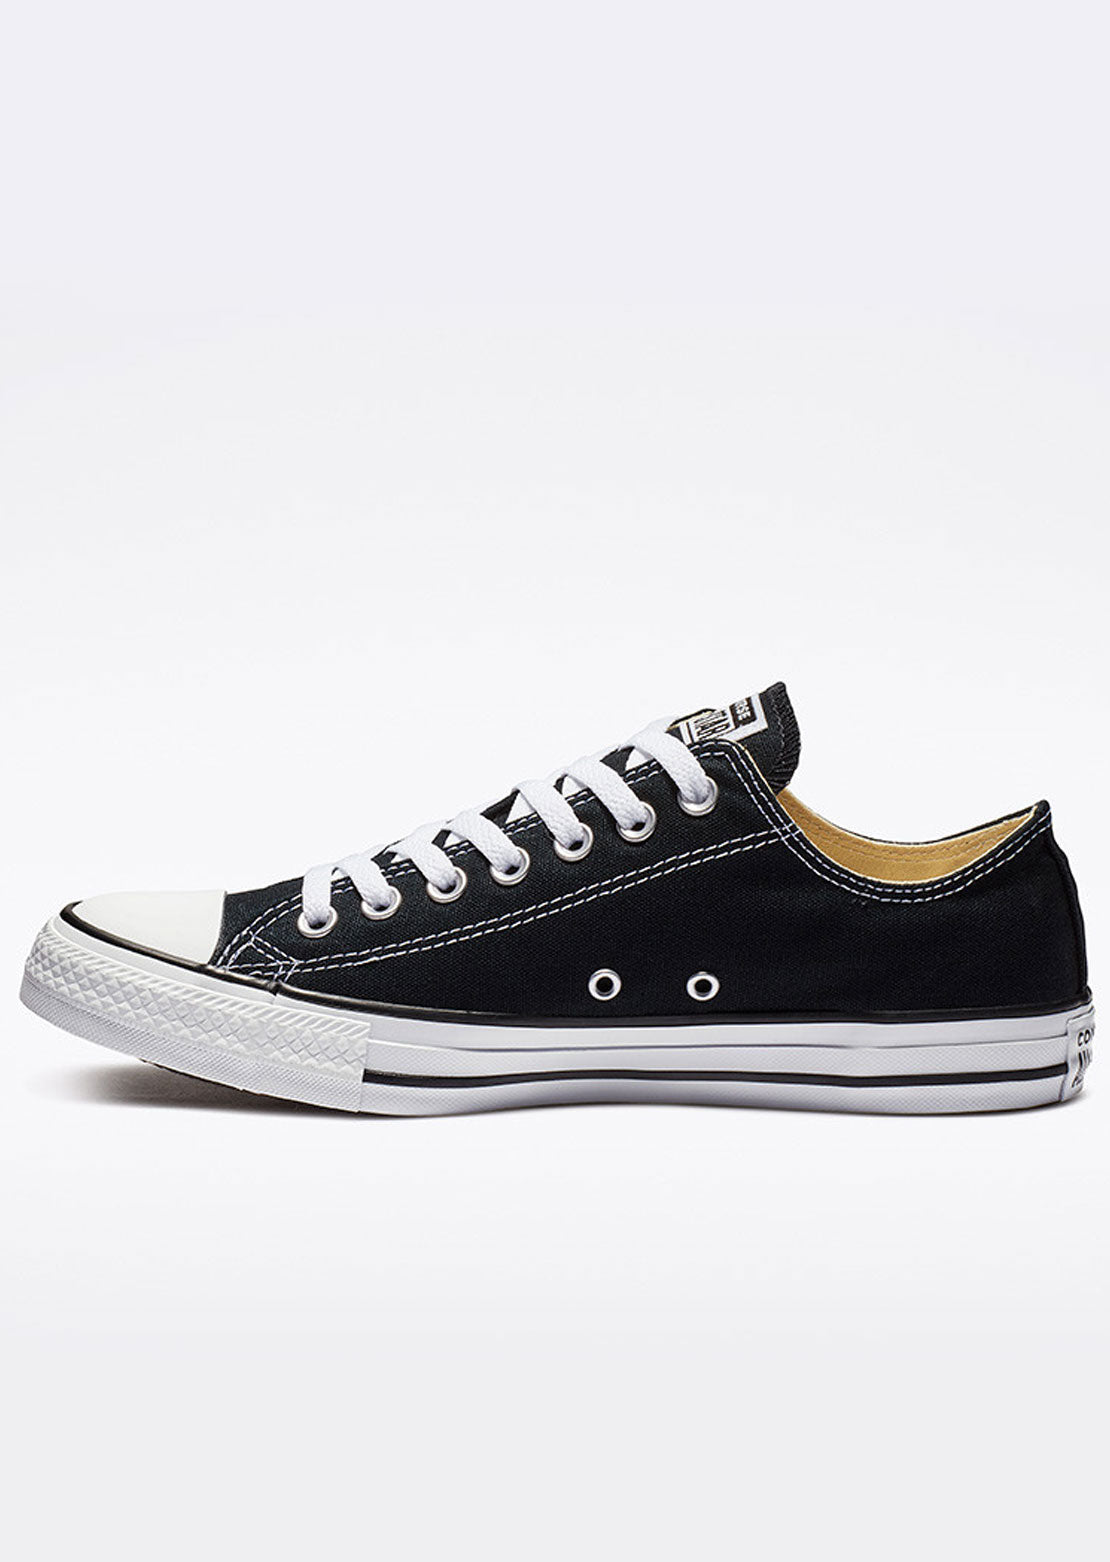 Converse Unisex Chuck Taylor All Star Low Top Shoes Black